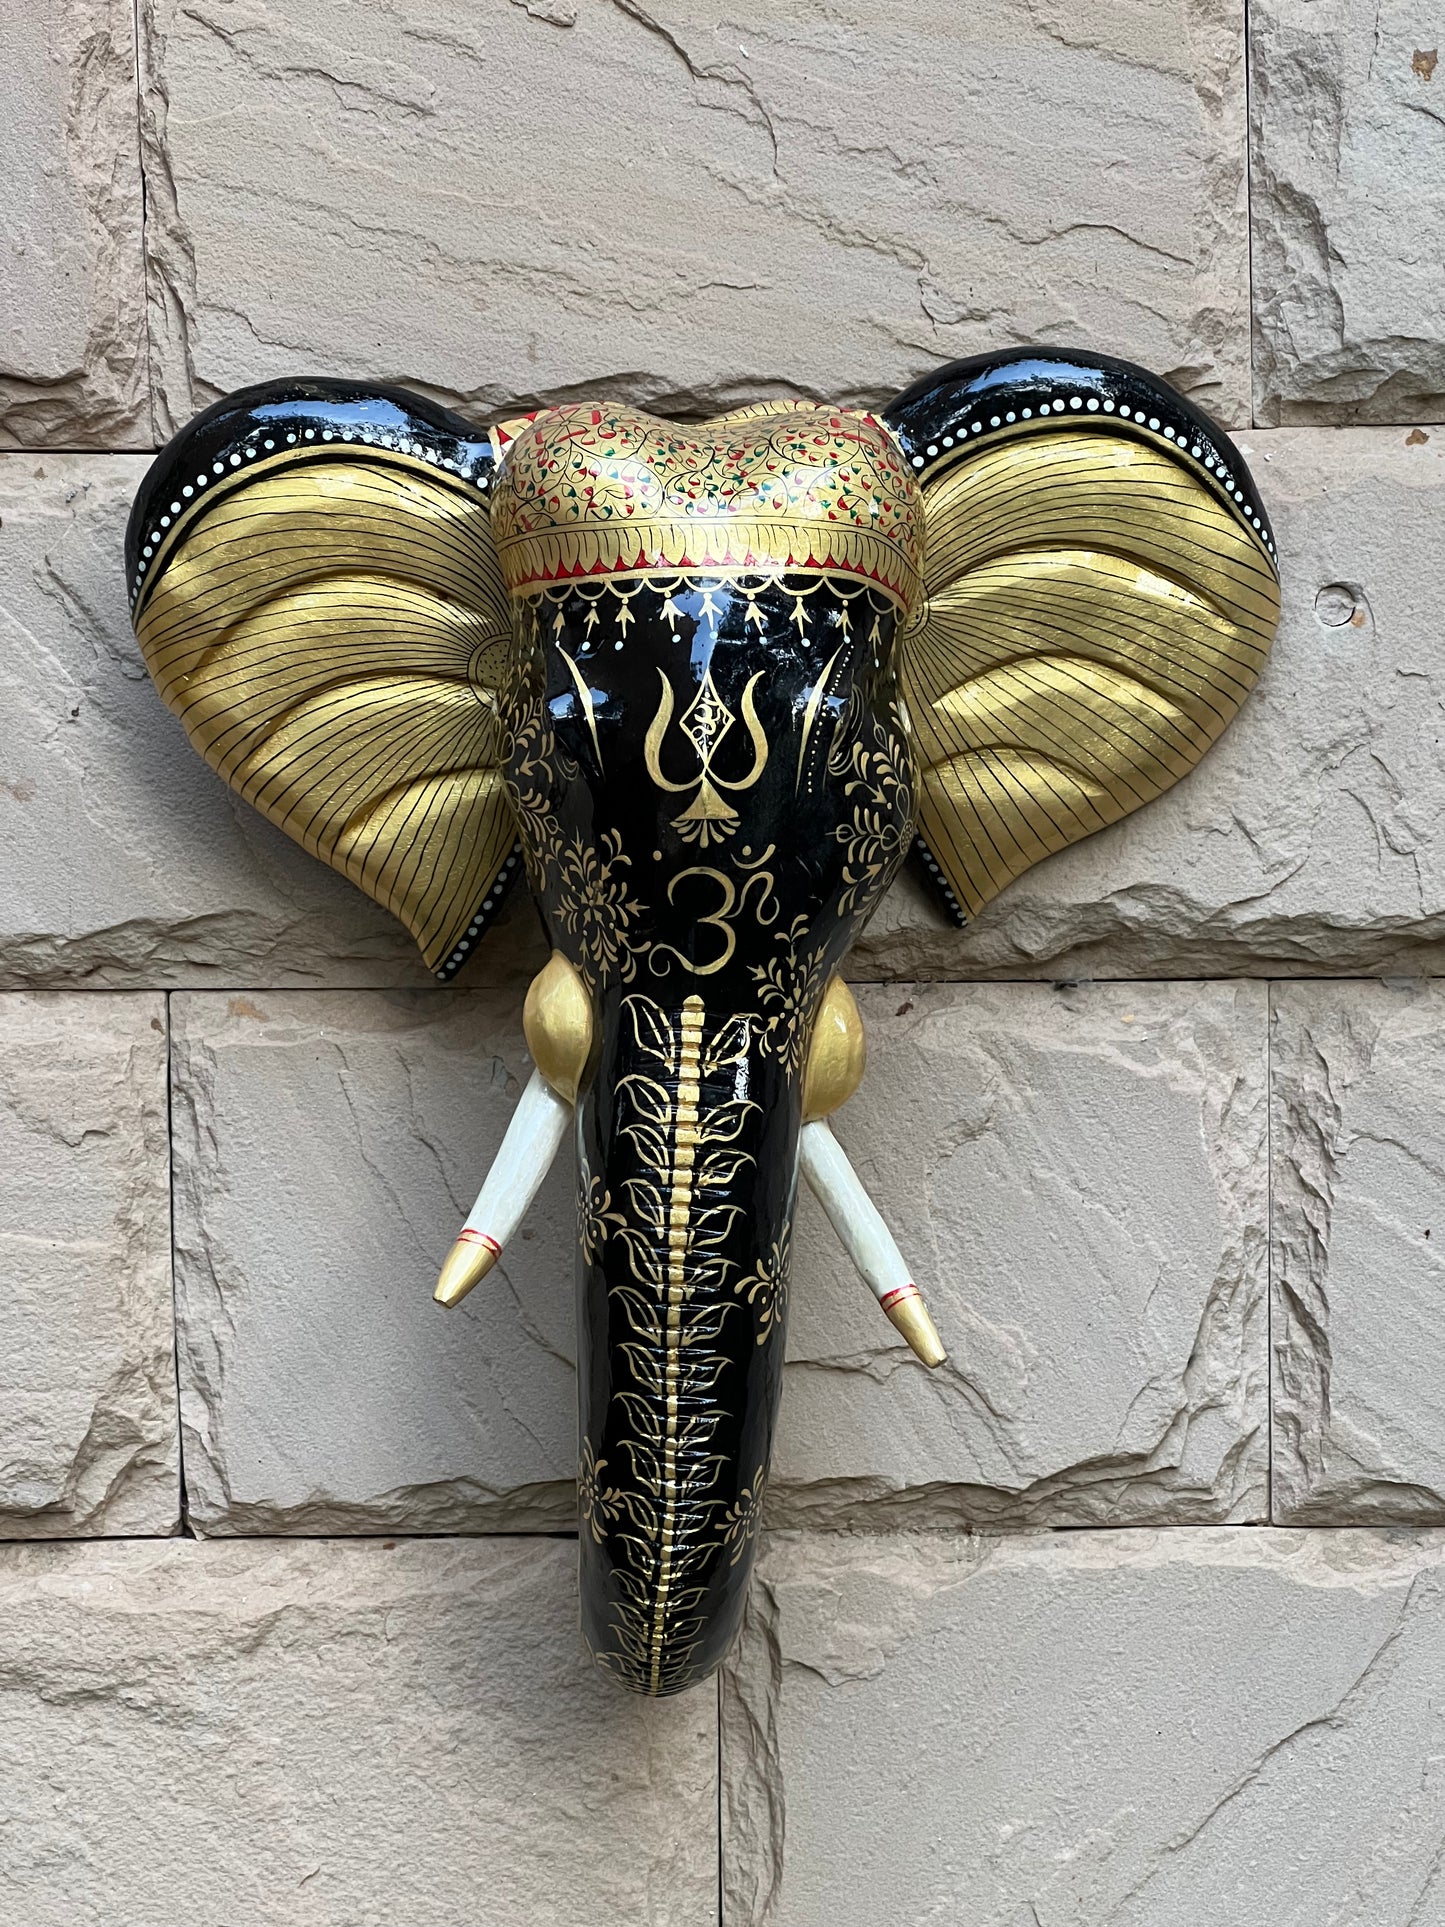 Image of Wooden Hand Painted Black Ganesha Face  The Source India is an Indian Handicraft, Home Decor, Furnishing and Textiles Store. Based out of Hauz Khas Village New Delhi, each piece is carefully procured to allow the enhancement of India's Culture.